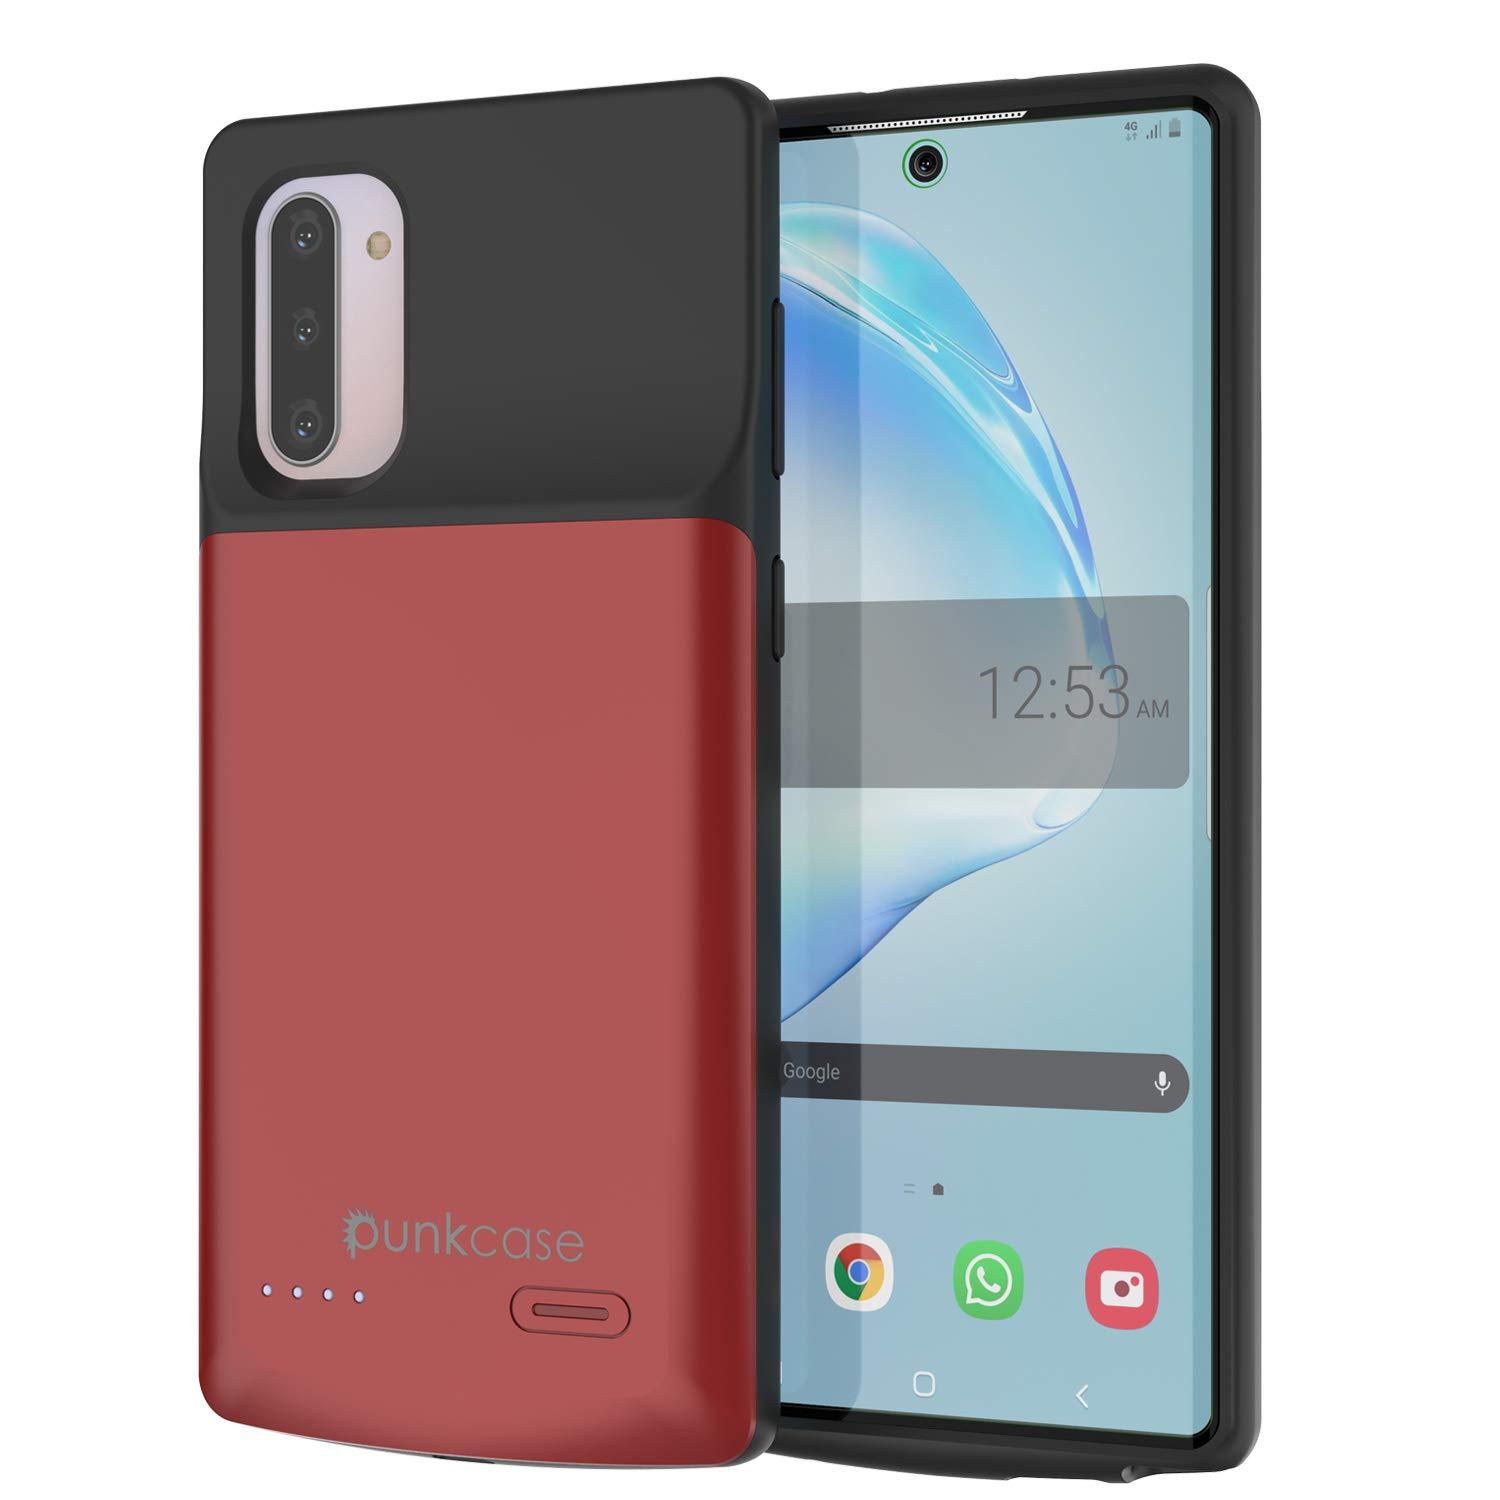 Galaxy Note 10 5200mAH Battery Charger W/ USB Port Slim Case [Red] (Color in image: Red)